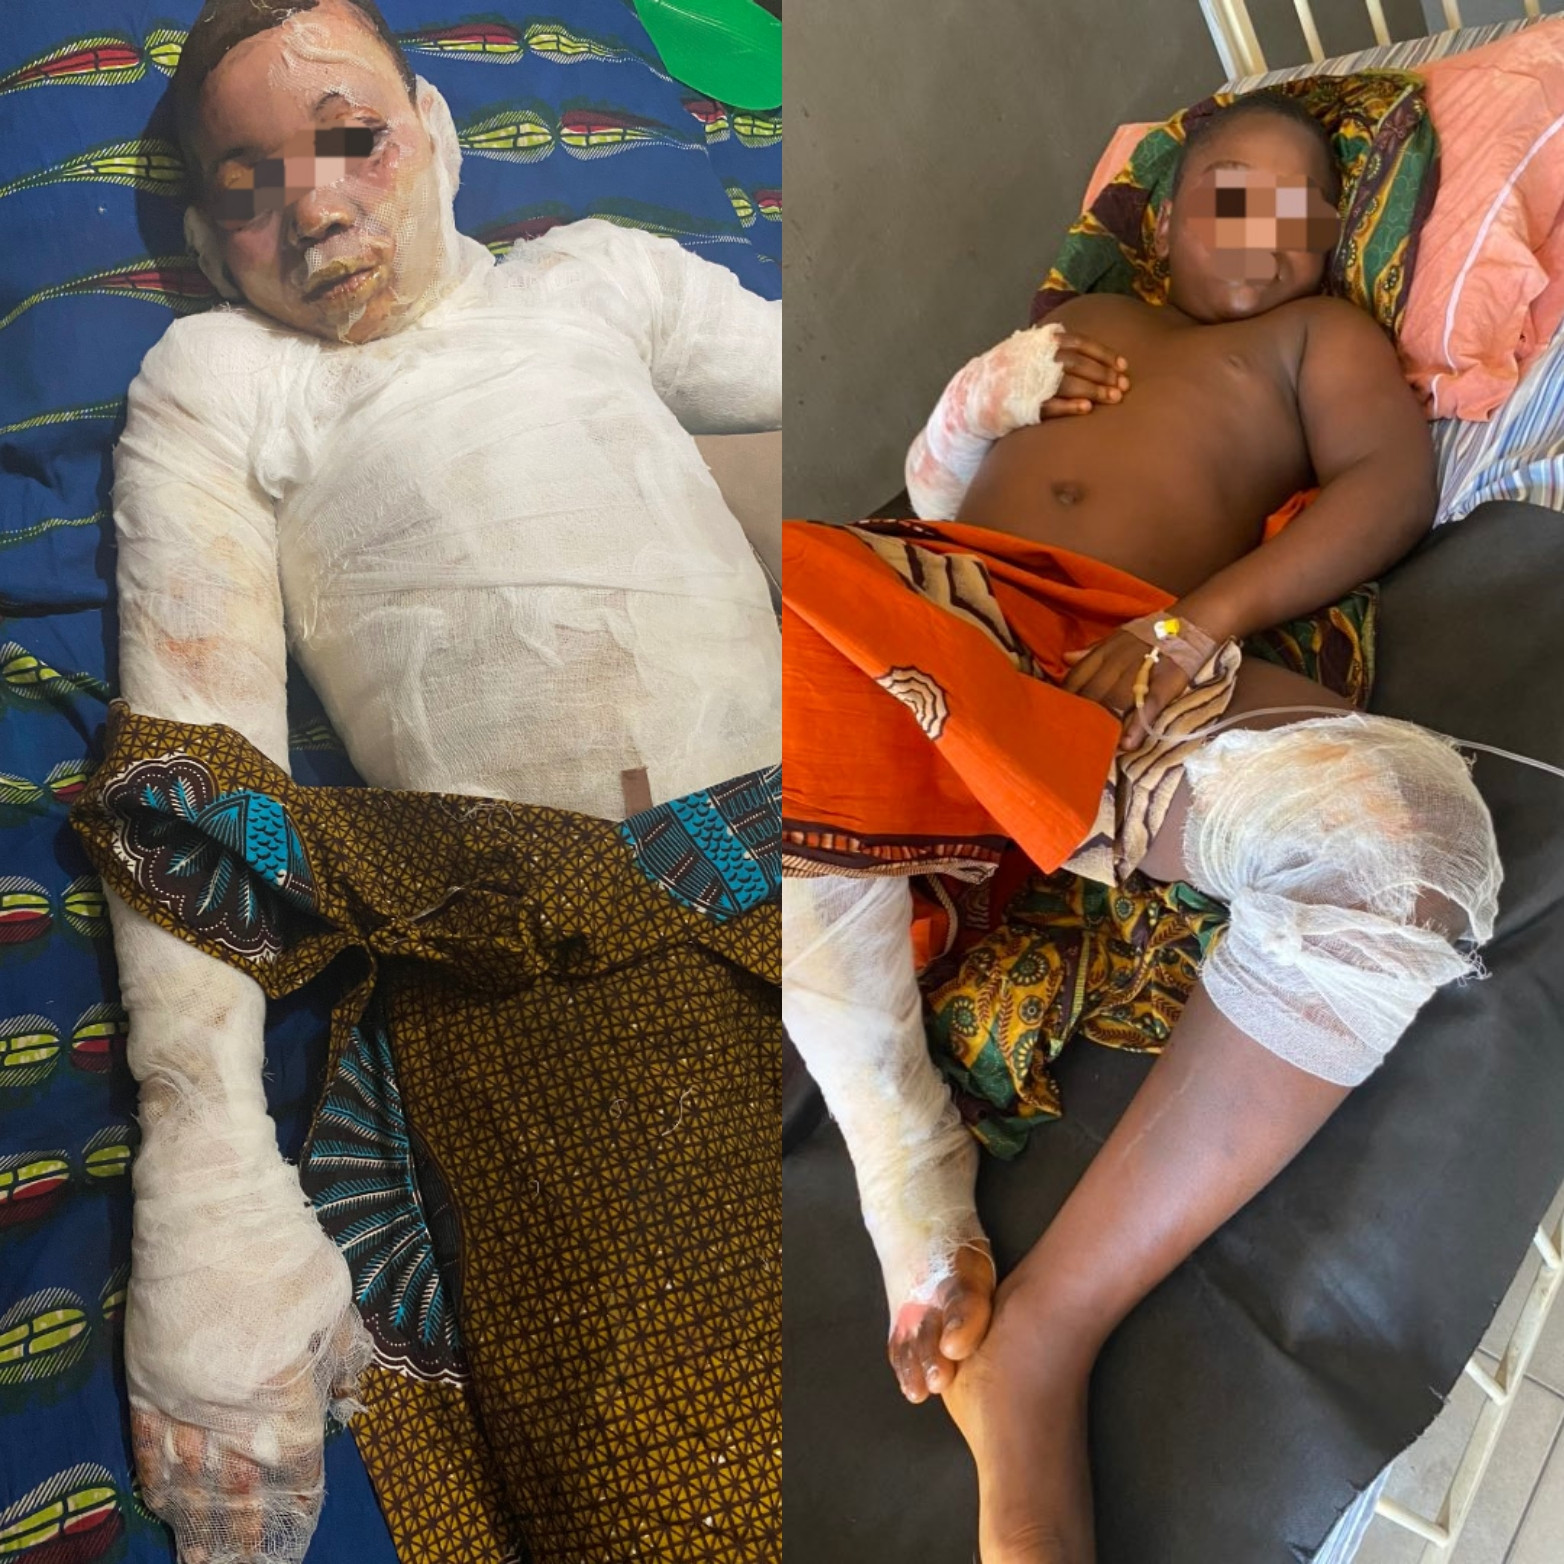 Two brothers suffer severe burns as fire engulfs their family home (graphic photos)